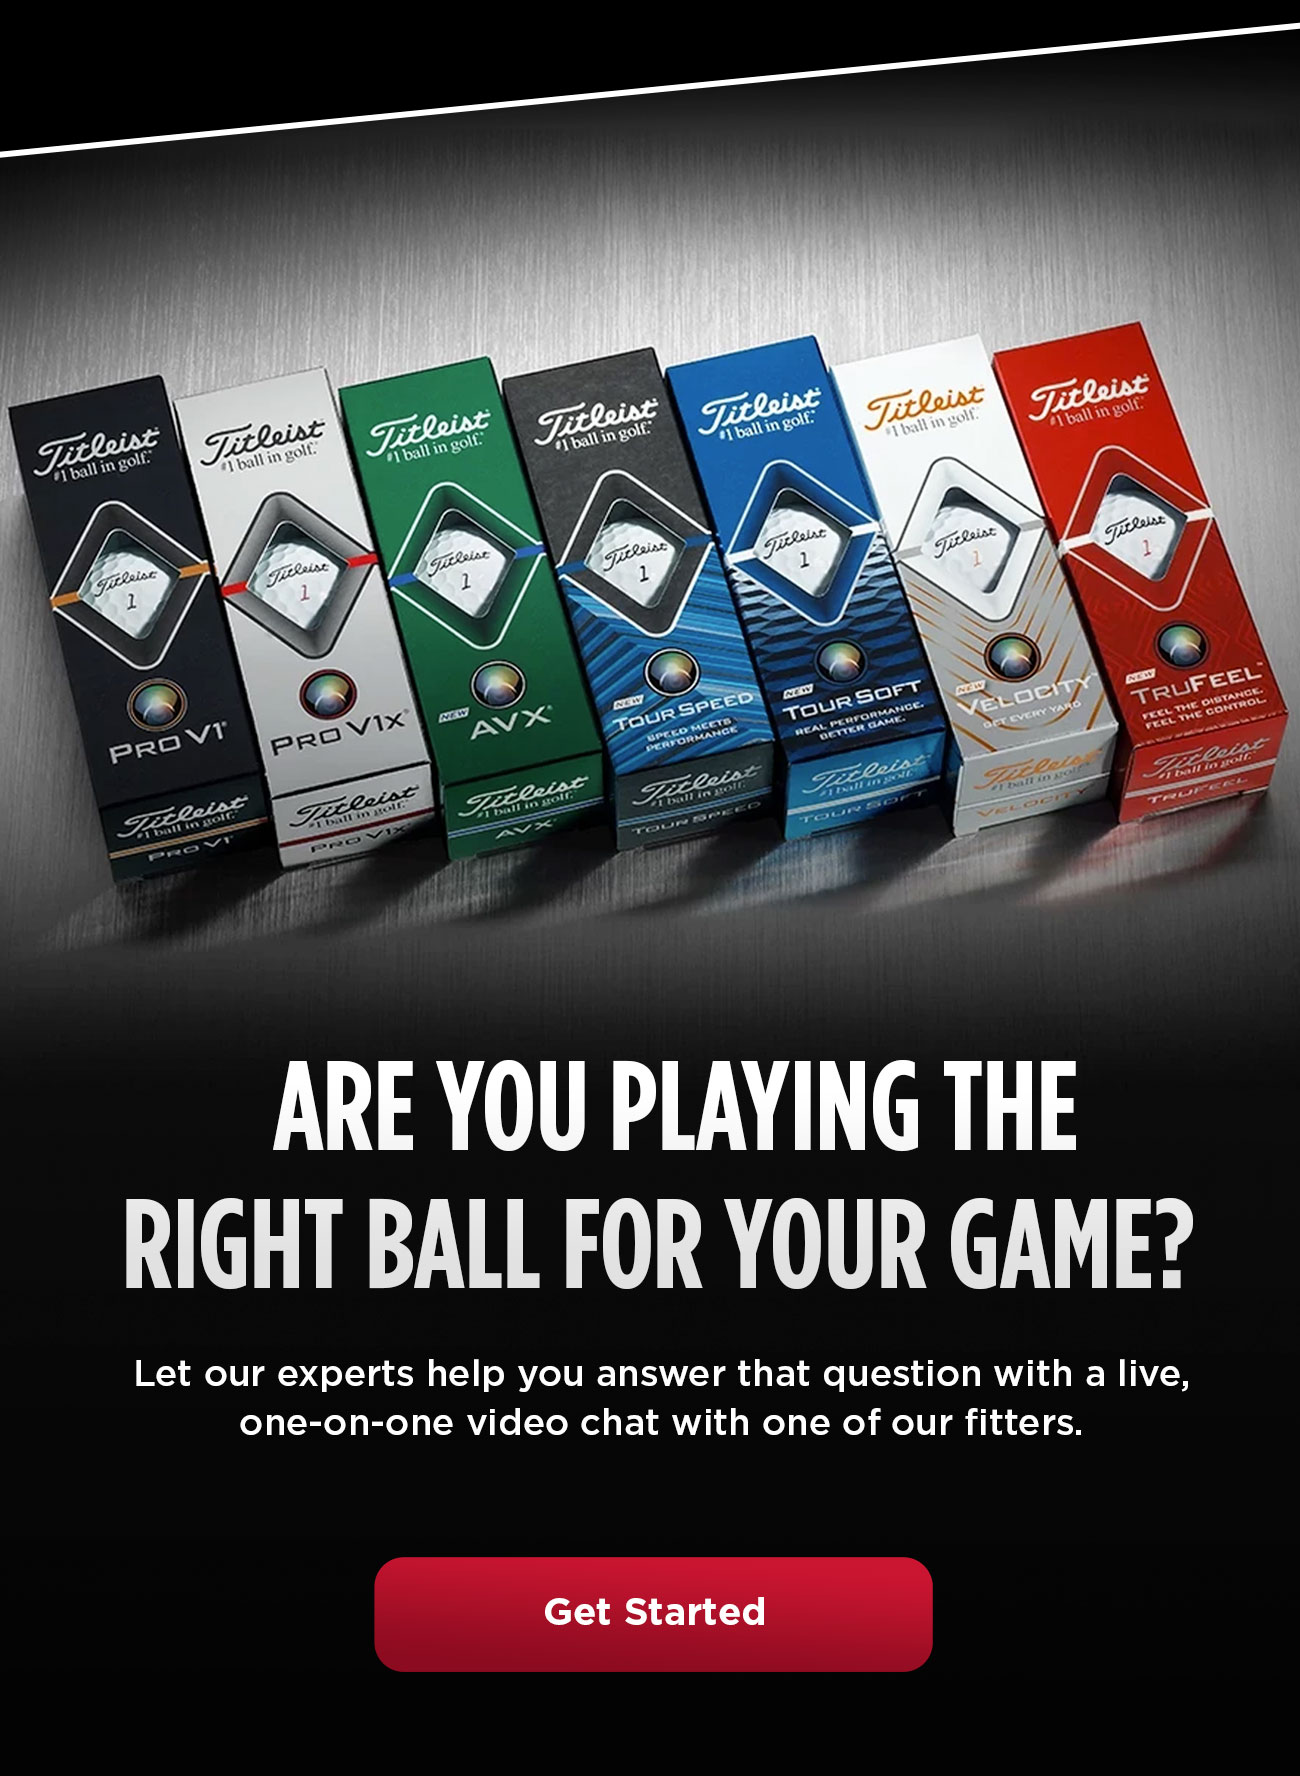 Are You Playing the Right Ball for Your Game?